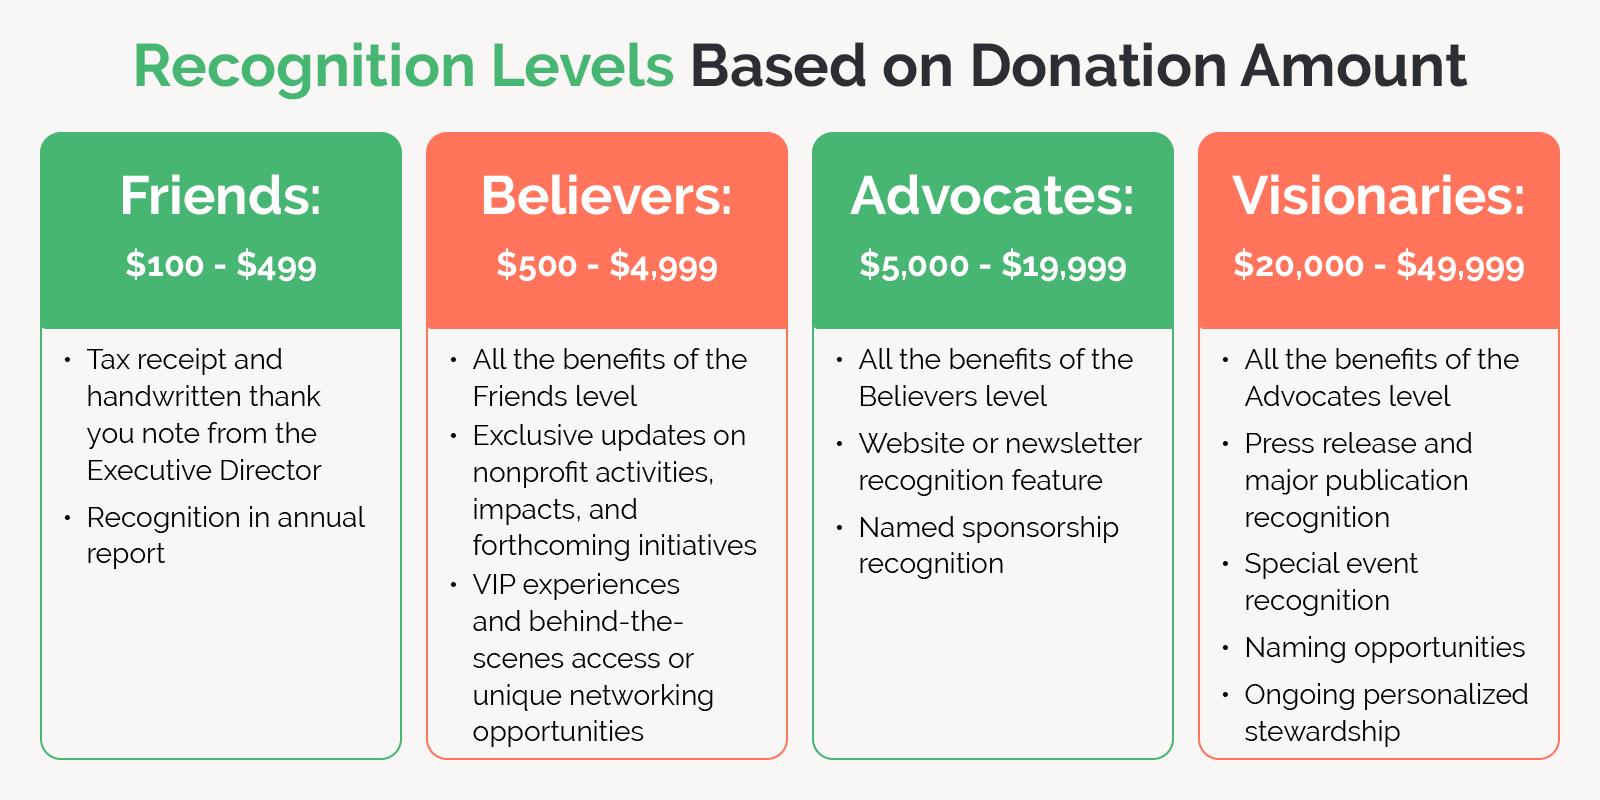 This image describes how a nonprofit might categorize donor recognition tiers based on donation amount.